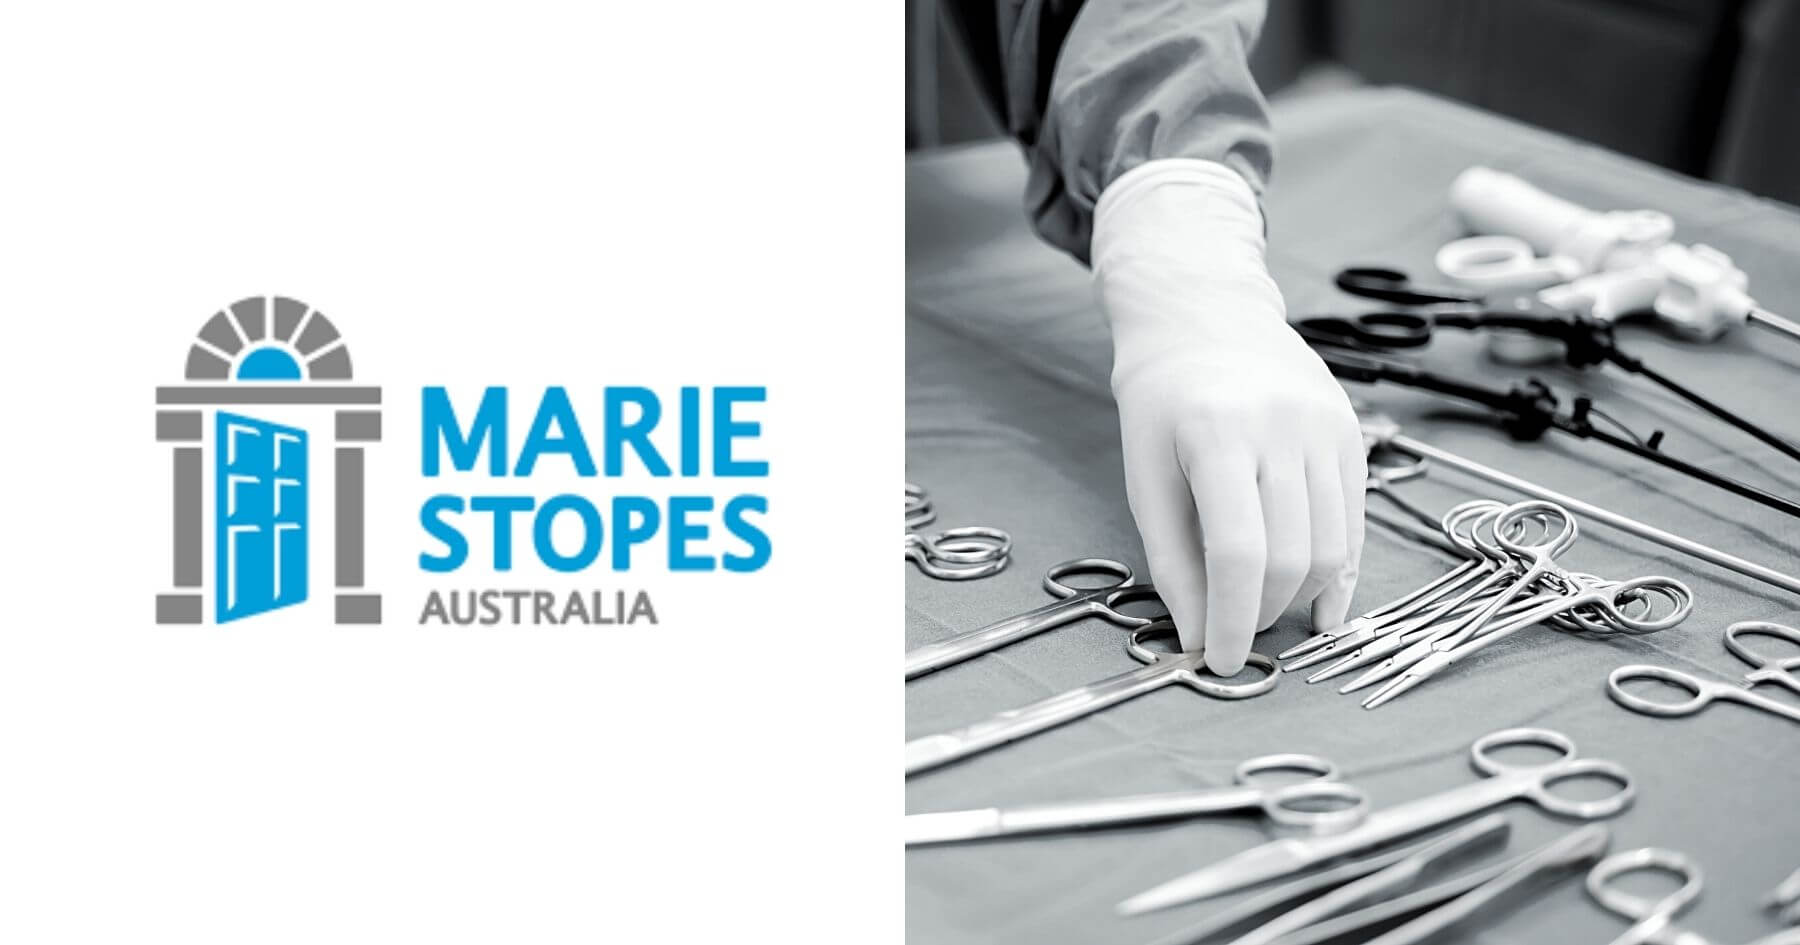 5th Marie Stopes Australia abortion clinic closes due to financial difficulties